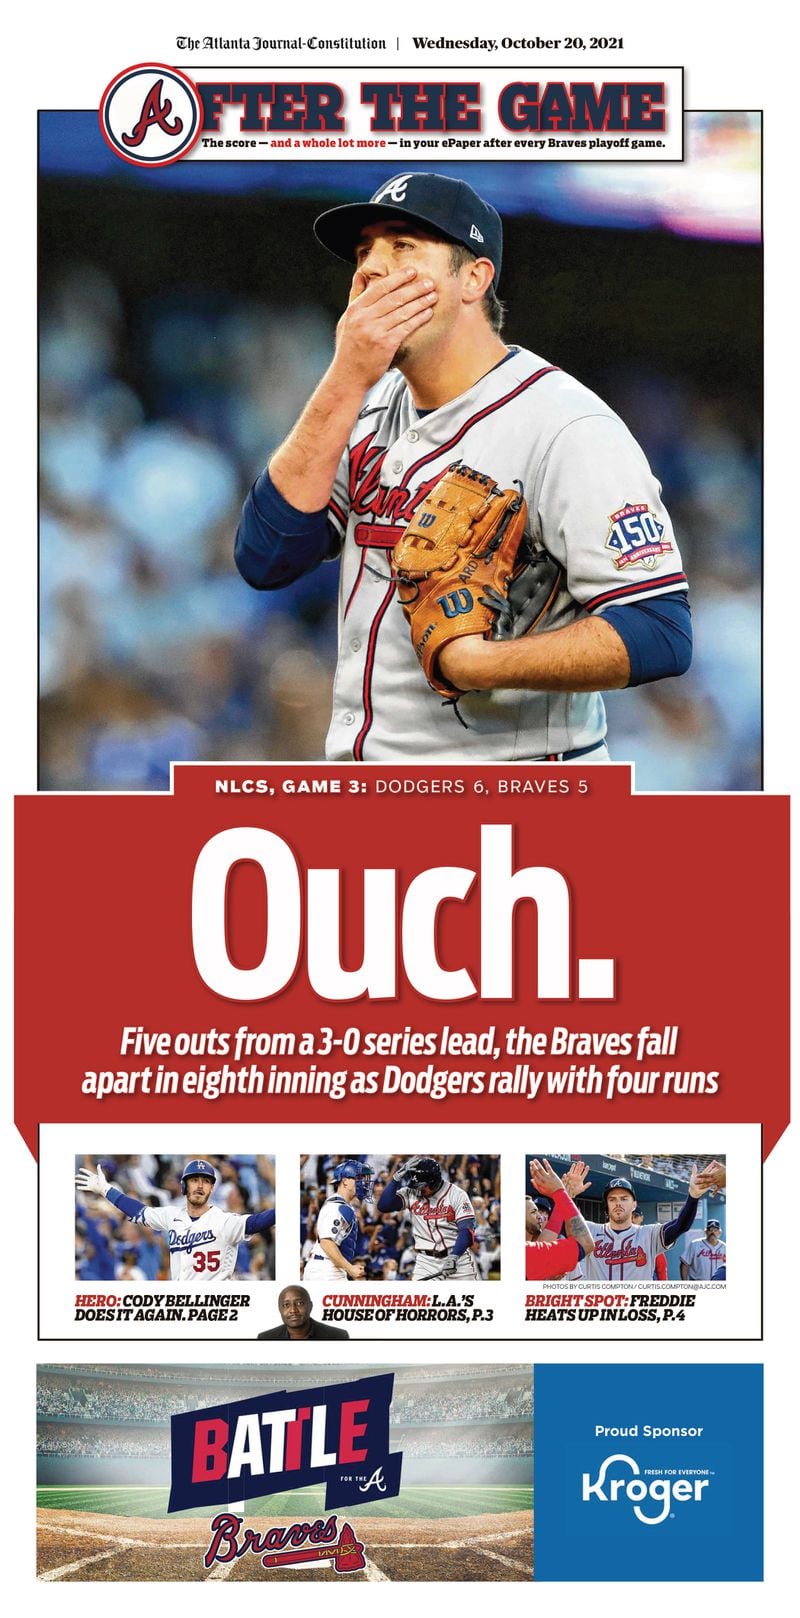 ‘Ouch!’ – Atlanta Braves game section in today’s ePaper